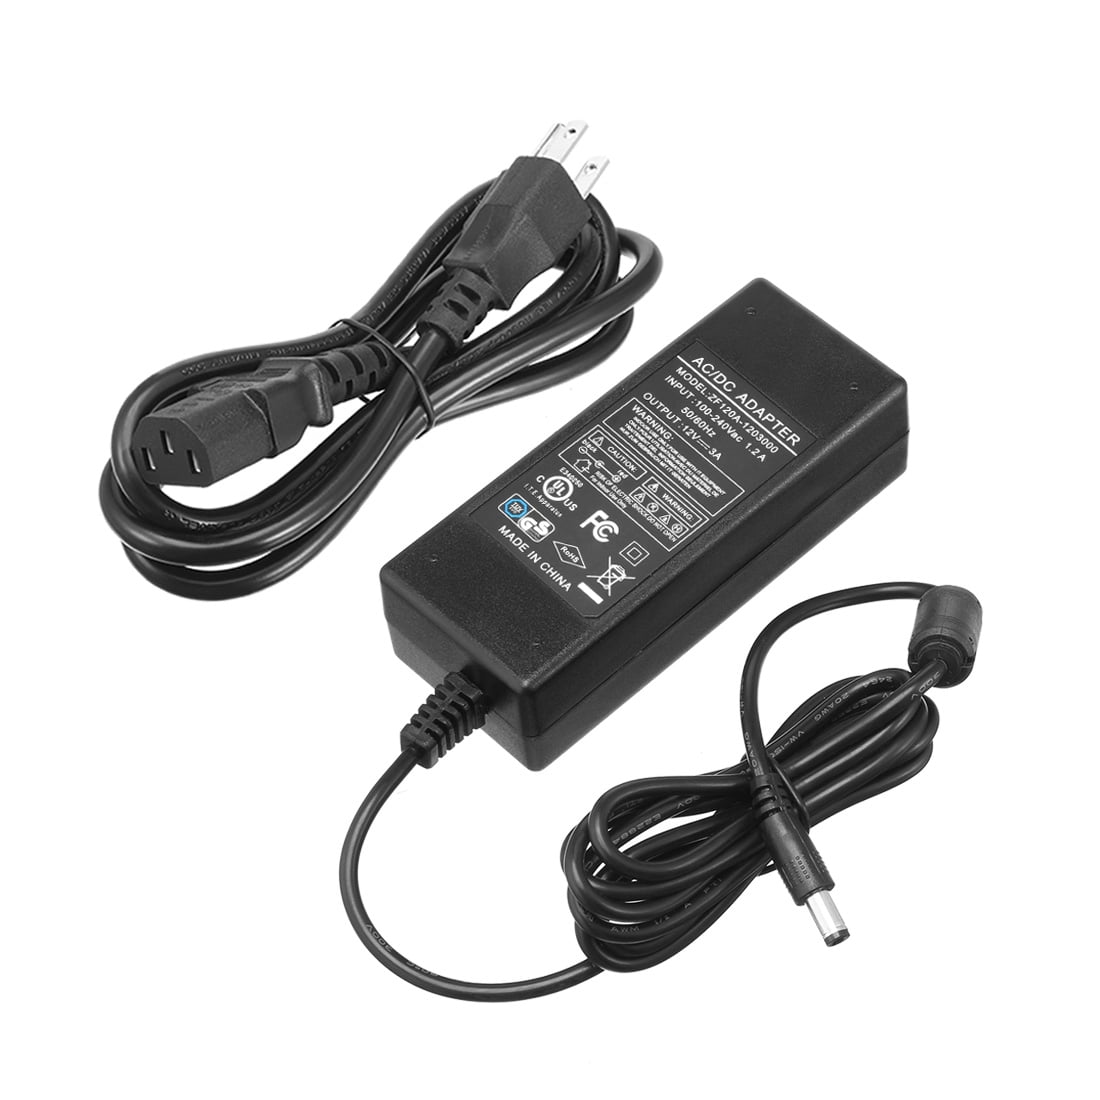 Bargains AC 100V-240V To DC 12V 3A Transformers Power Supply Adapter Charger UL Listed - Walmart.com